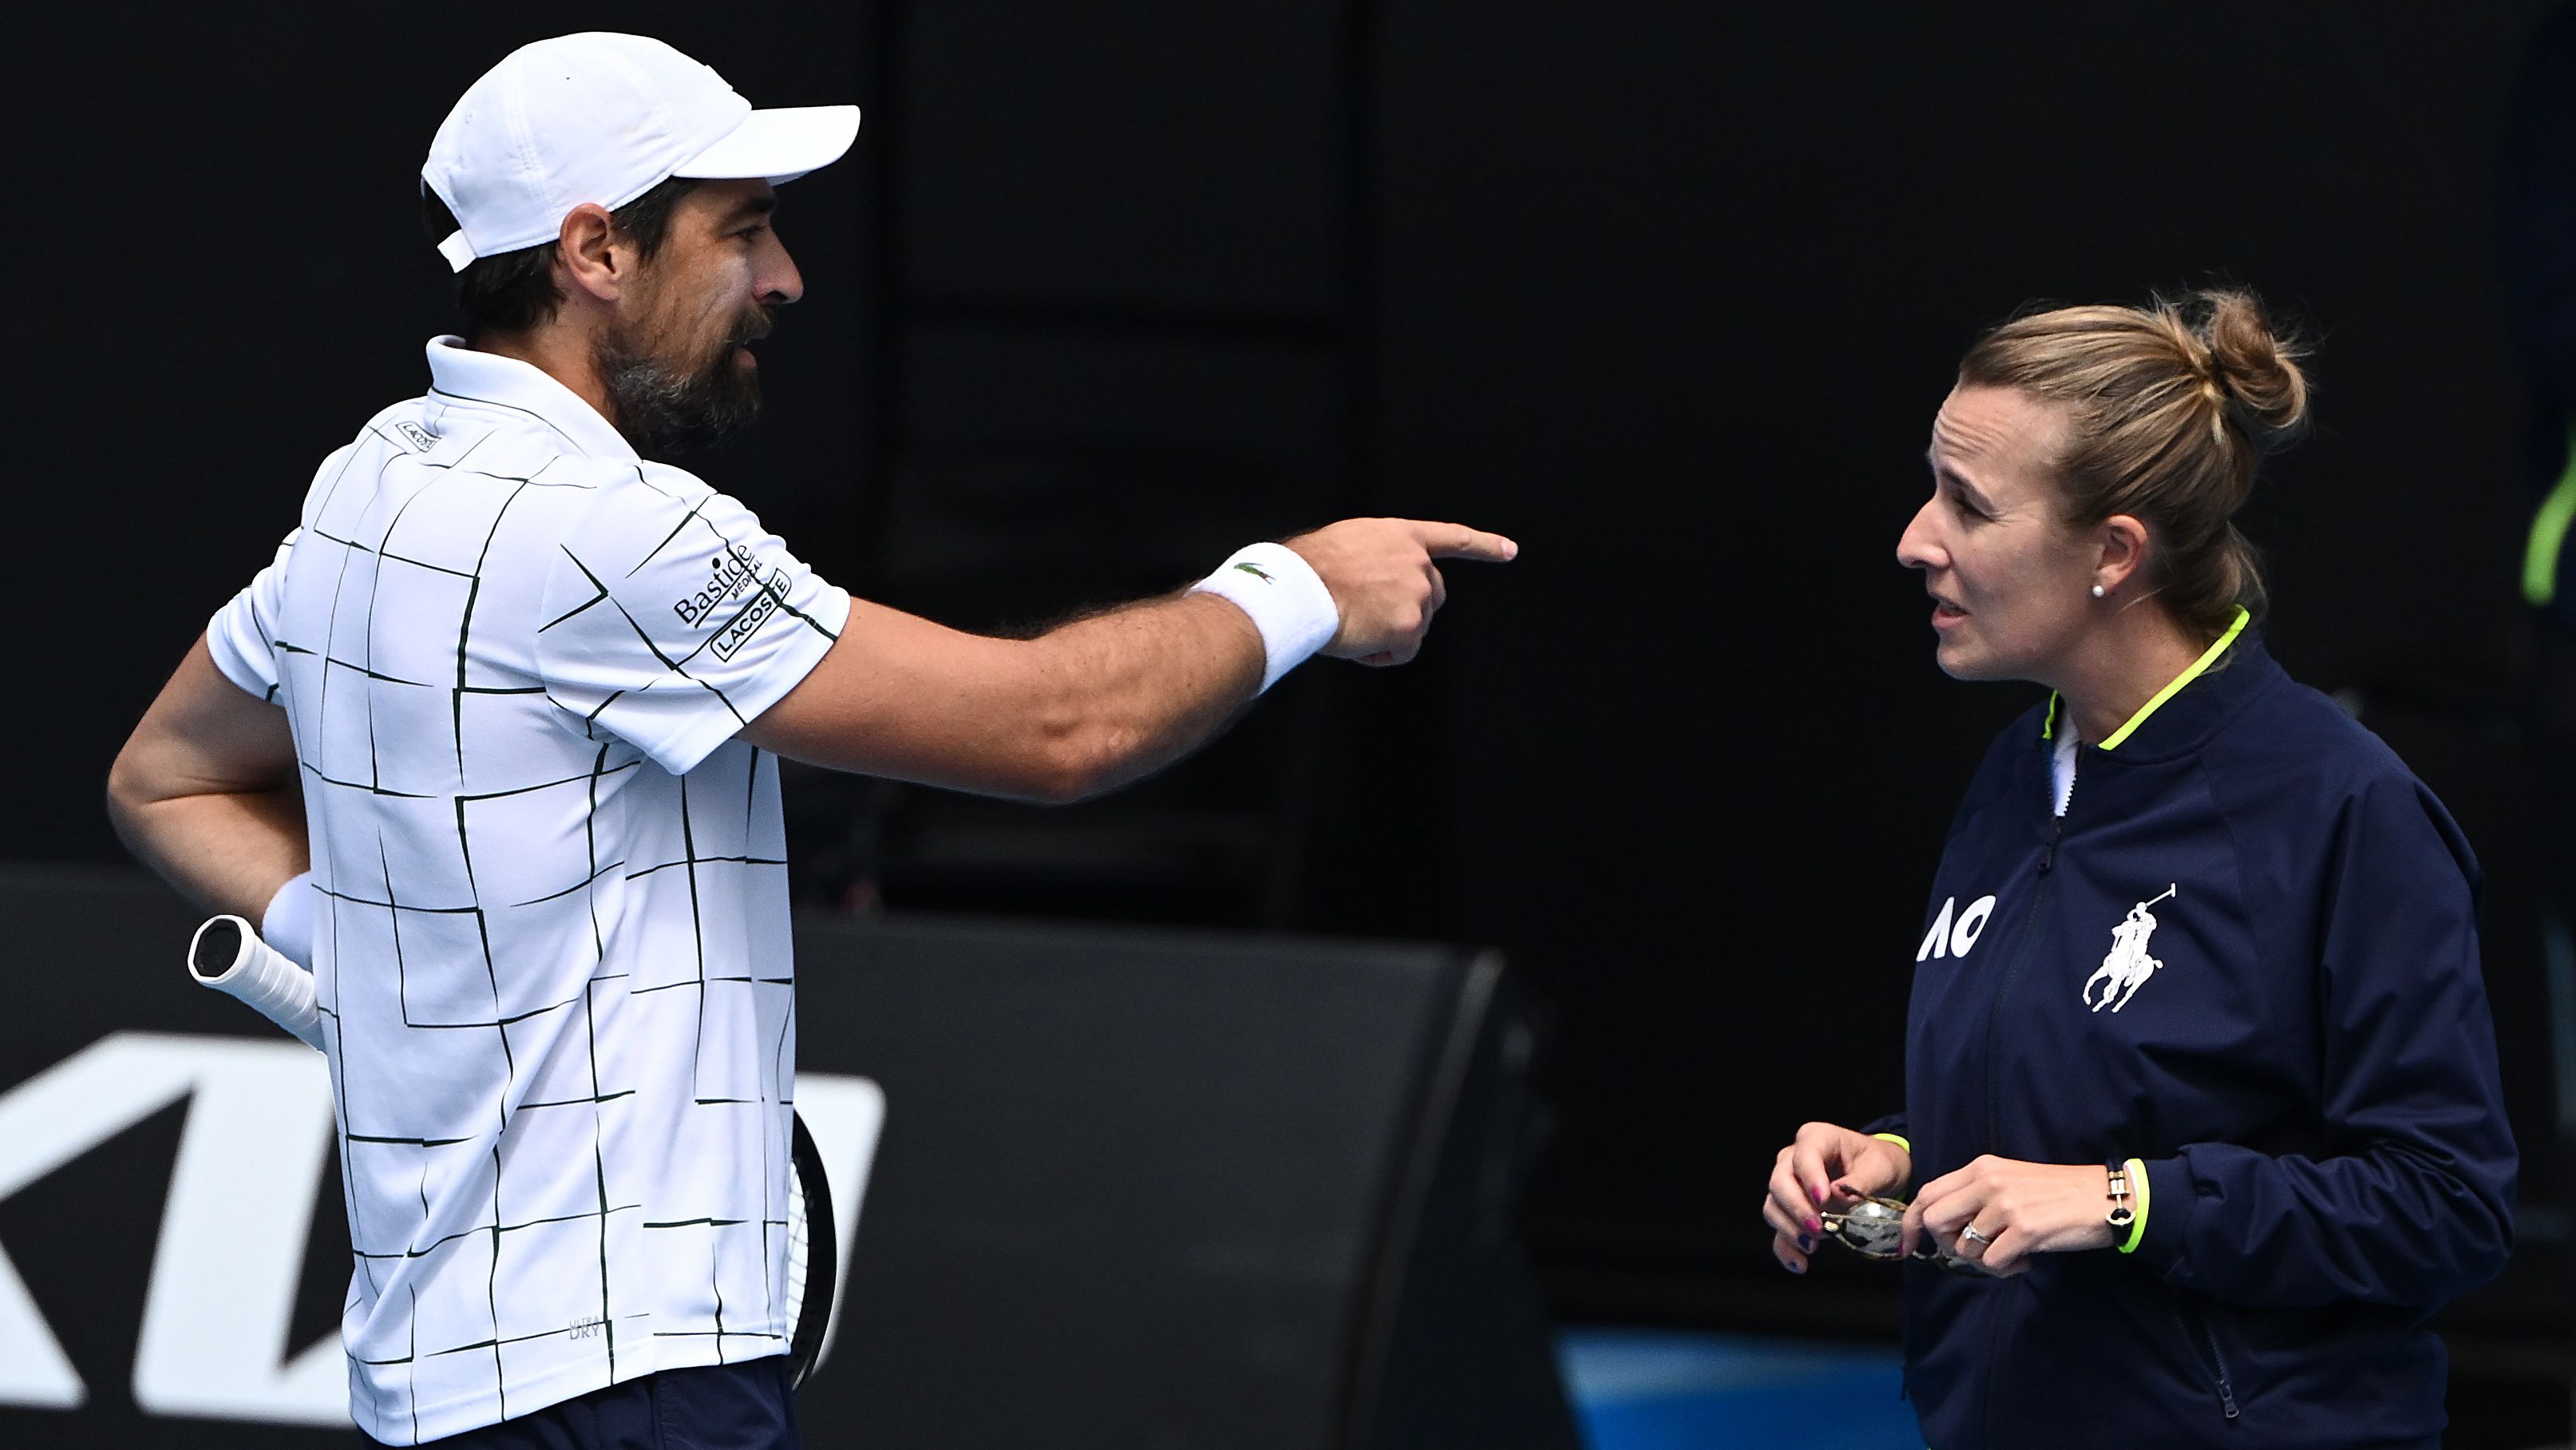 MELBOURNE, AUSTRALIA - JANUARY 19: Jeremy Chardy of France speaks to chair umpire Miriam Bley in their round two singles match against Daniel Evans of Great Britain during day four of the 2023 Australian Open at Melbourne Park on January 19, 2023 in Melbourne, Australia. (Photo by Quinn Rooney/Getty Images)